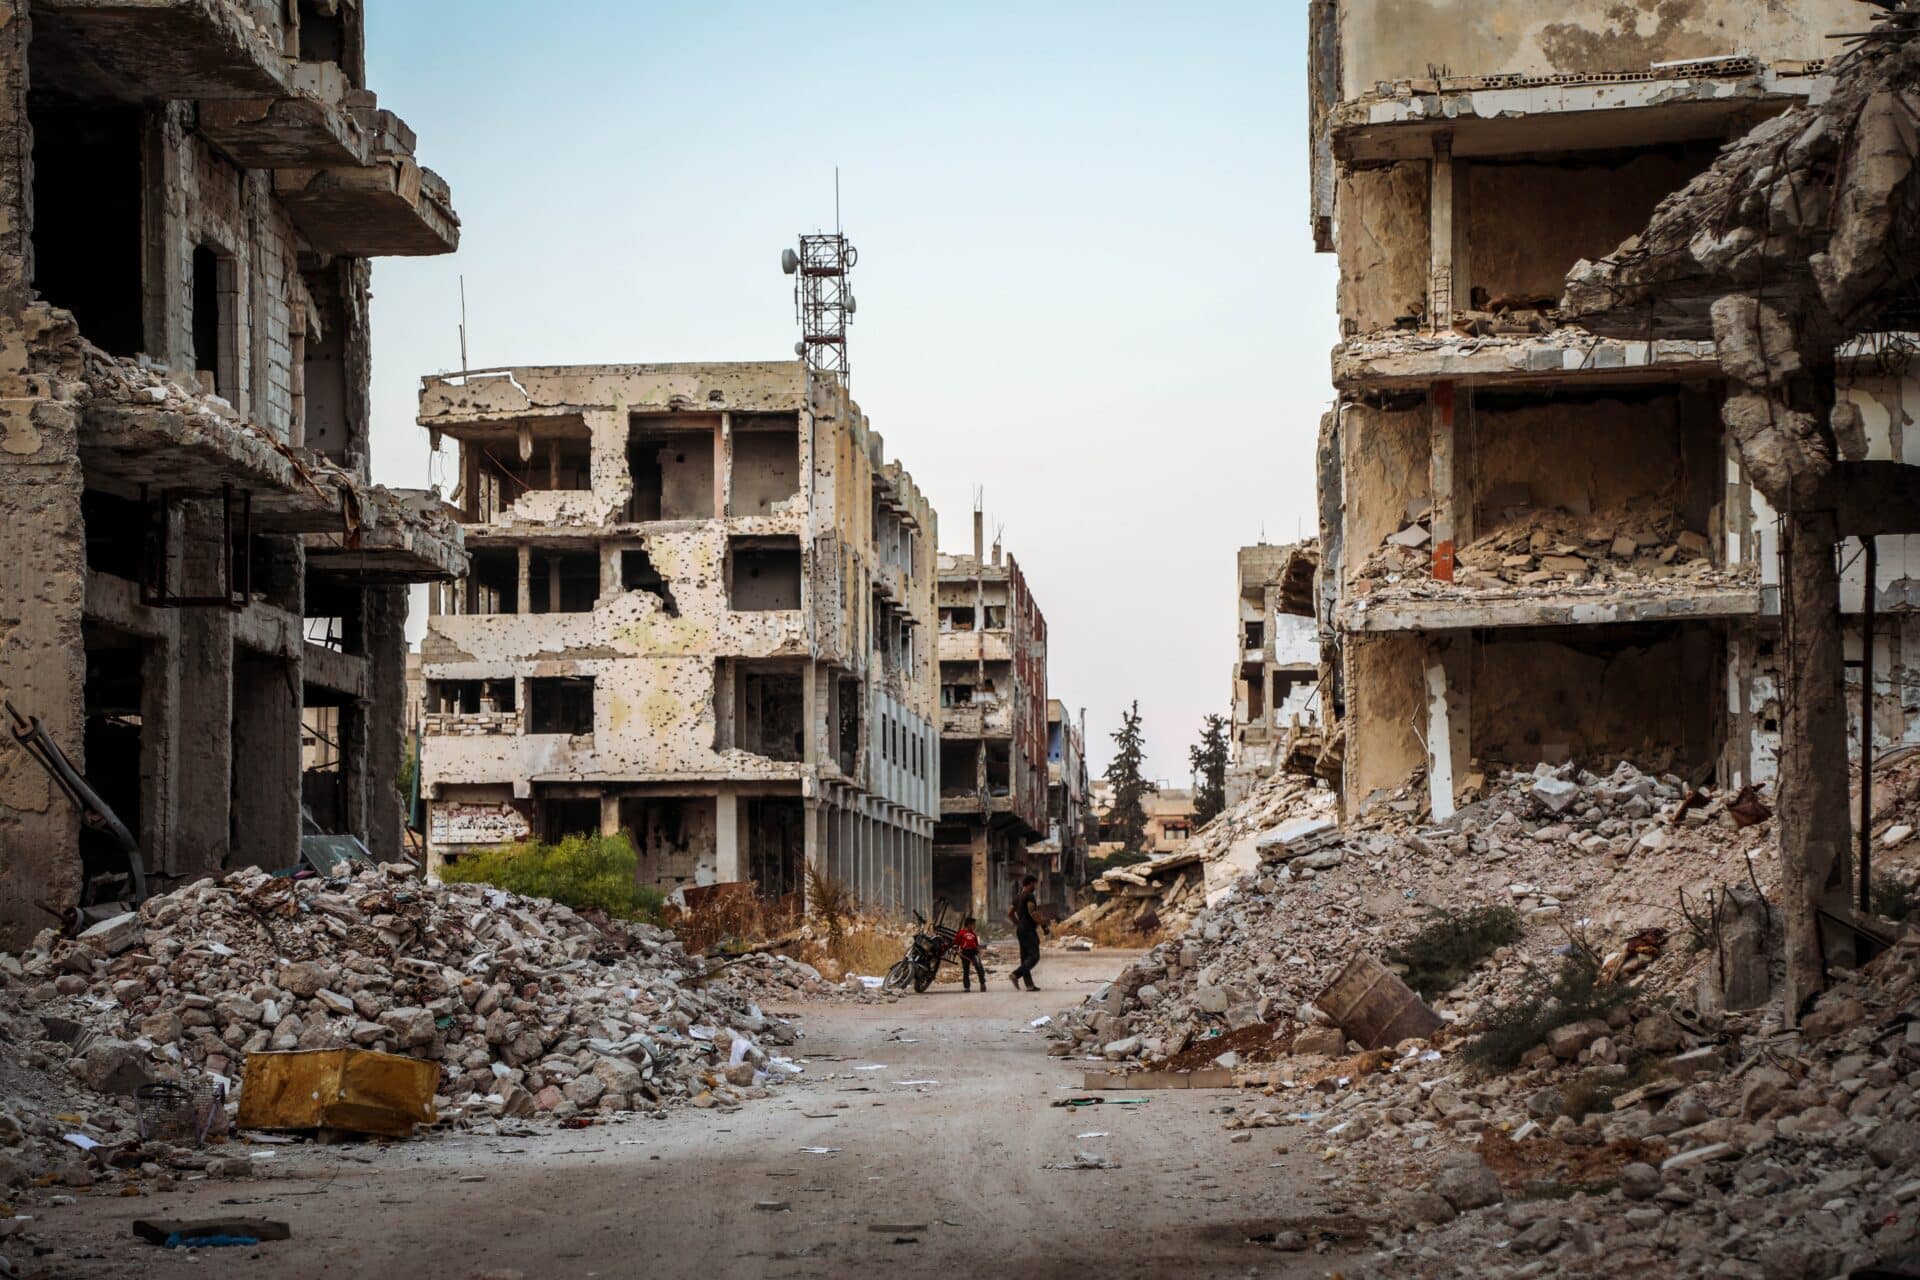 Daraa, Syria: one of the cities attacked with chemical weapons during the Syrian civil war. (Photo by <a href="https://unsplash.com/@mahmoud_ms1?utm_source=unsplash&utm_medium=referral&utm_content=creditCopyText">Mahmoud Sulaiman</a> on <a href="https://unsplash.com/photos/aO9nGw9Cbk0?utm_source=unsplash&utm_medium=referral&utm_content=creditCopyText">Unsplash</a>)